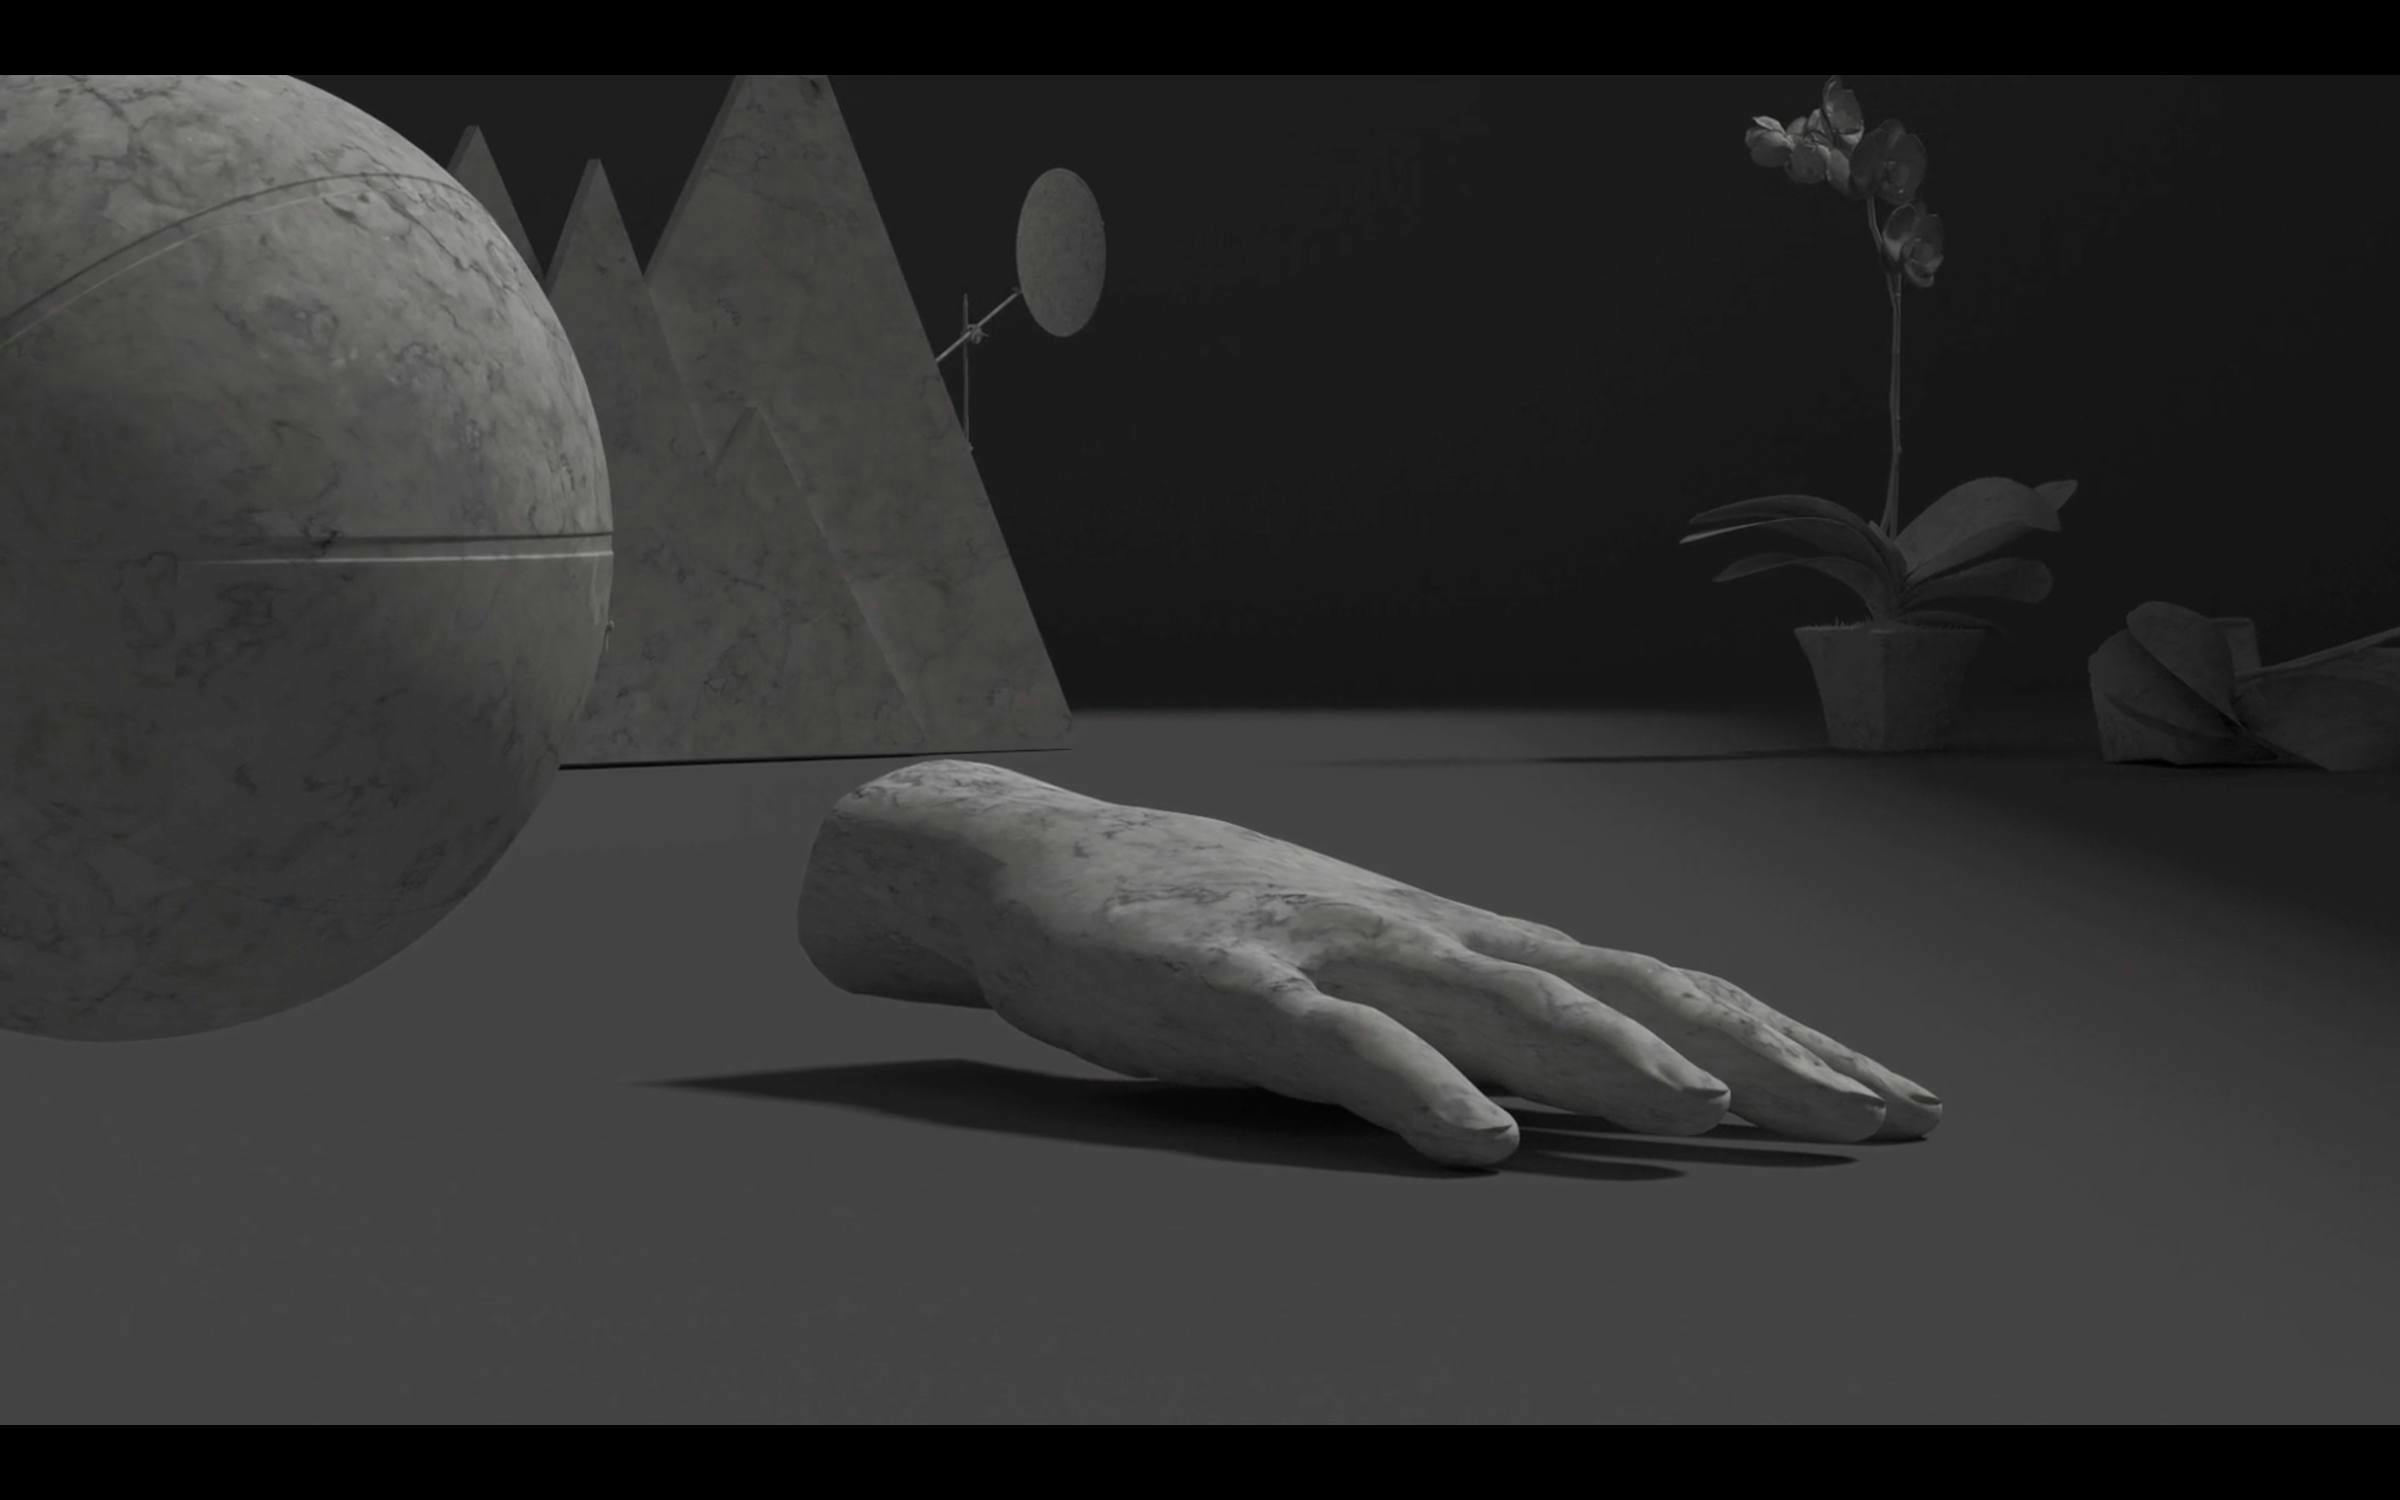 a digitally rendered black and white image of a disembodied hand, pyramids, flowers in pots and sphere. There is a surreal element to this image